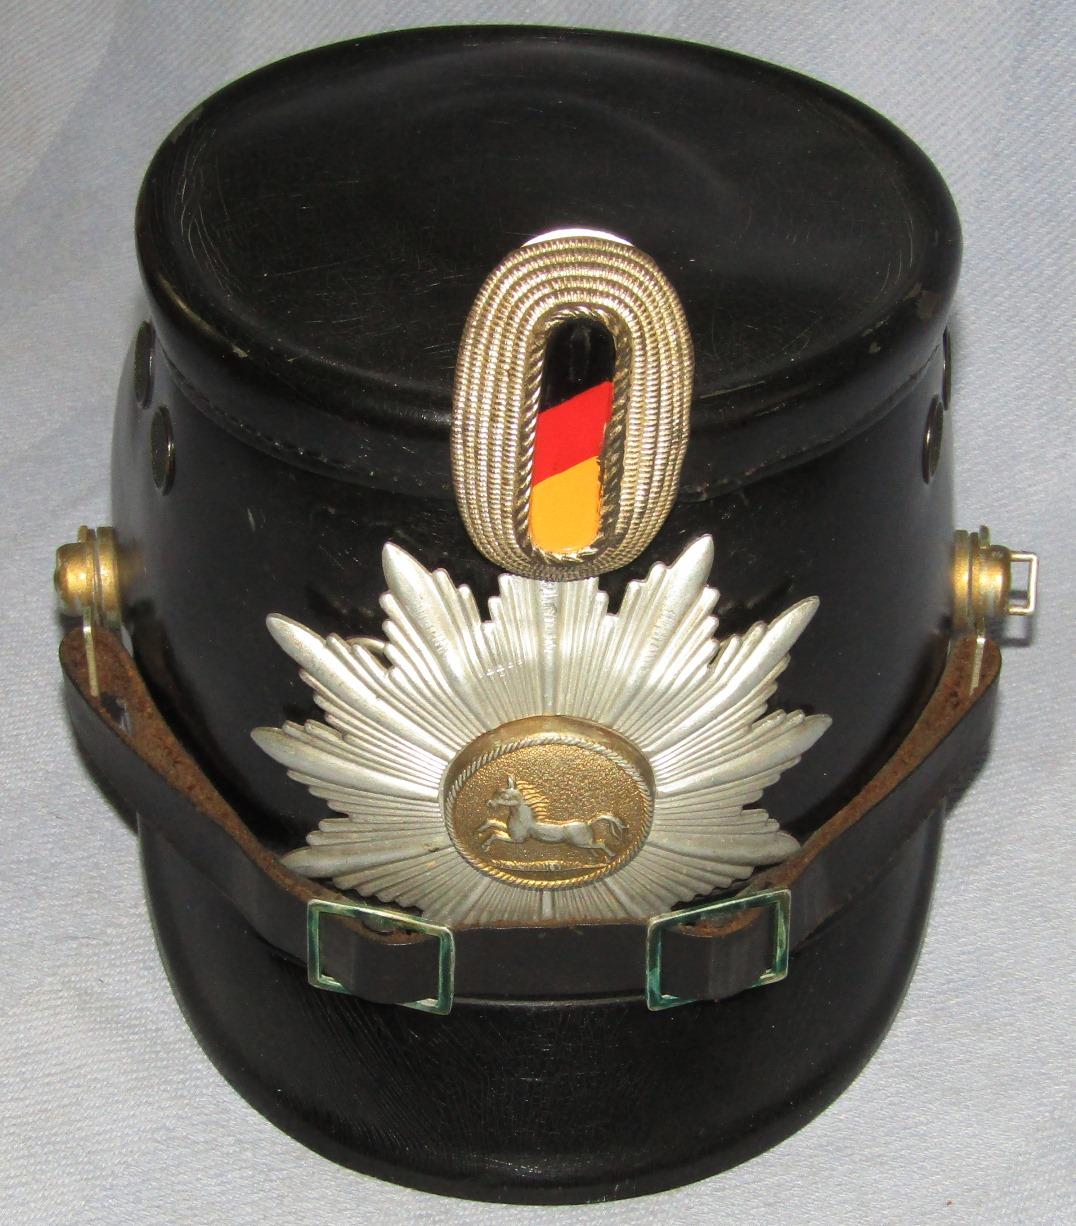 Early Occupation Period German Fire Police Shako-Lower Saxony Front Plate